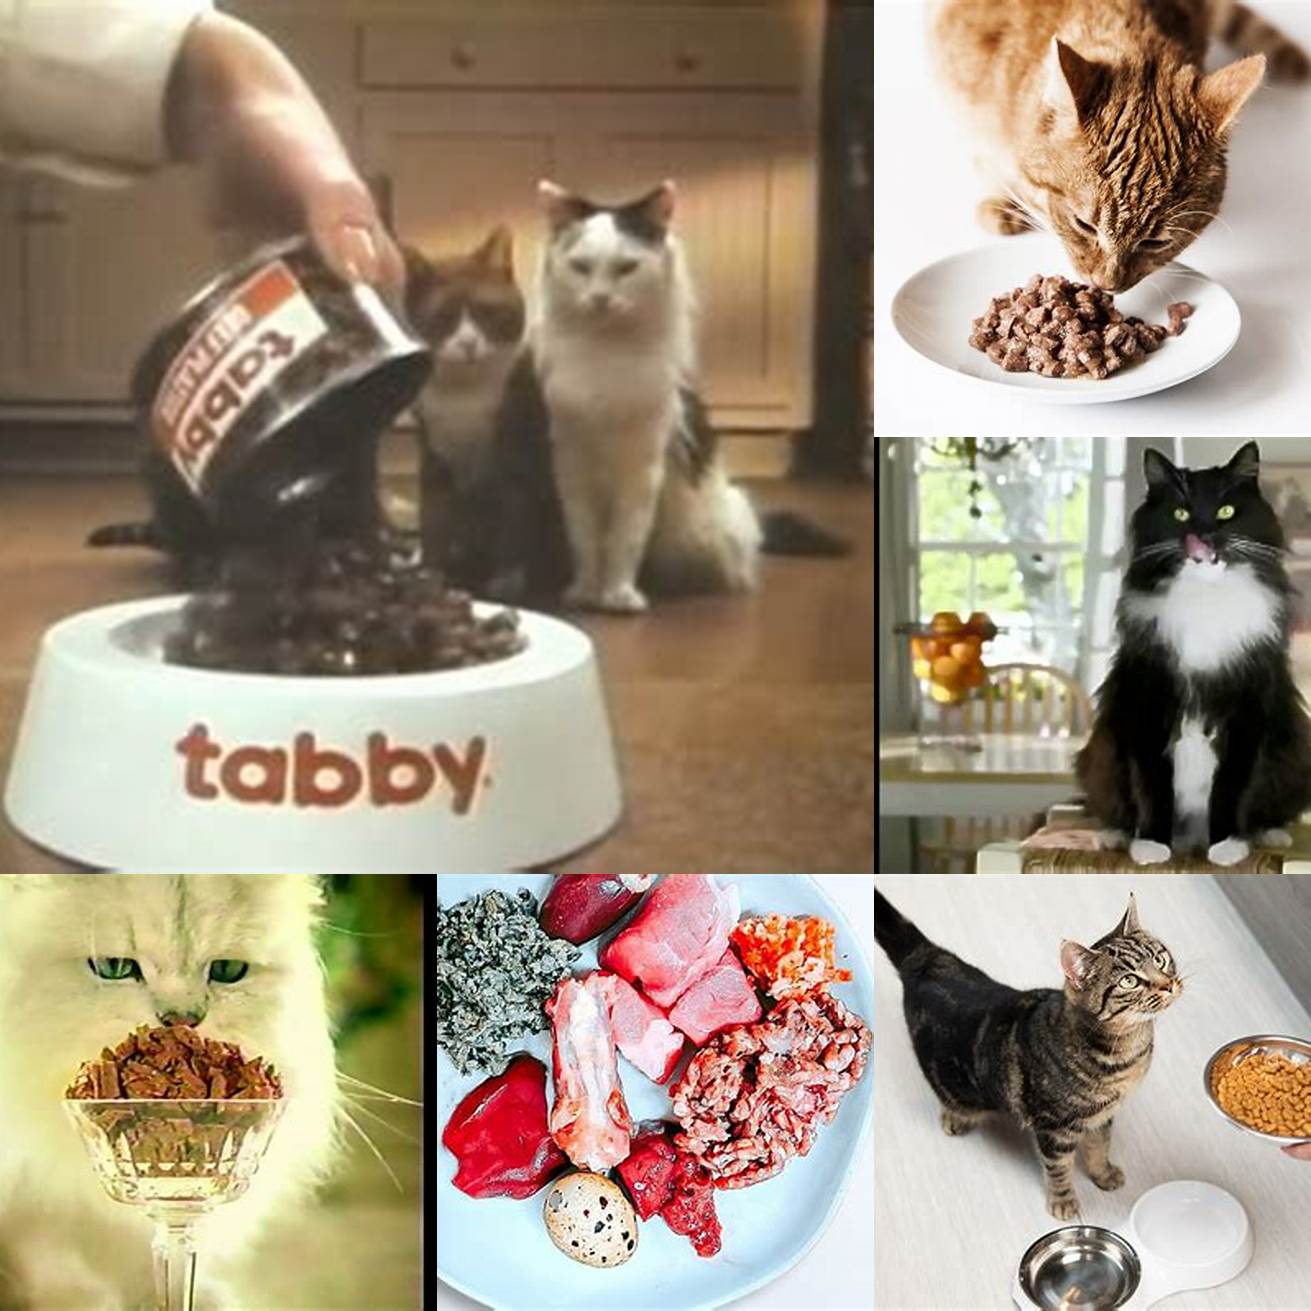 Feed your cat commercial cat food